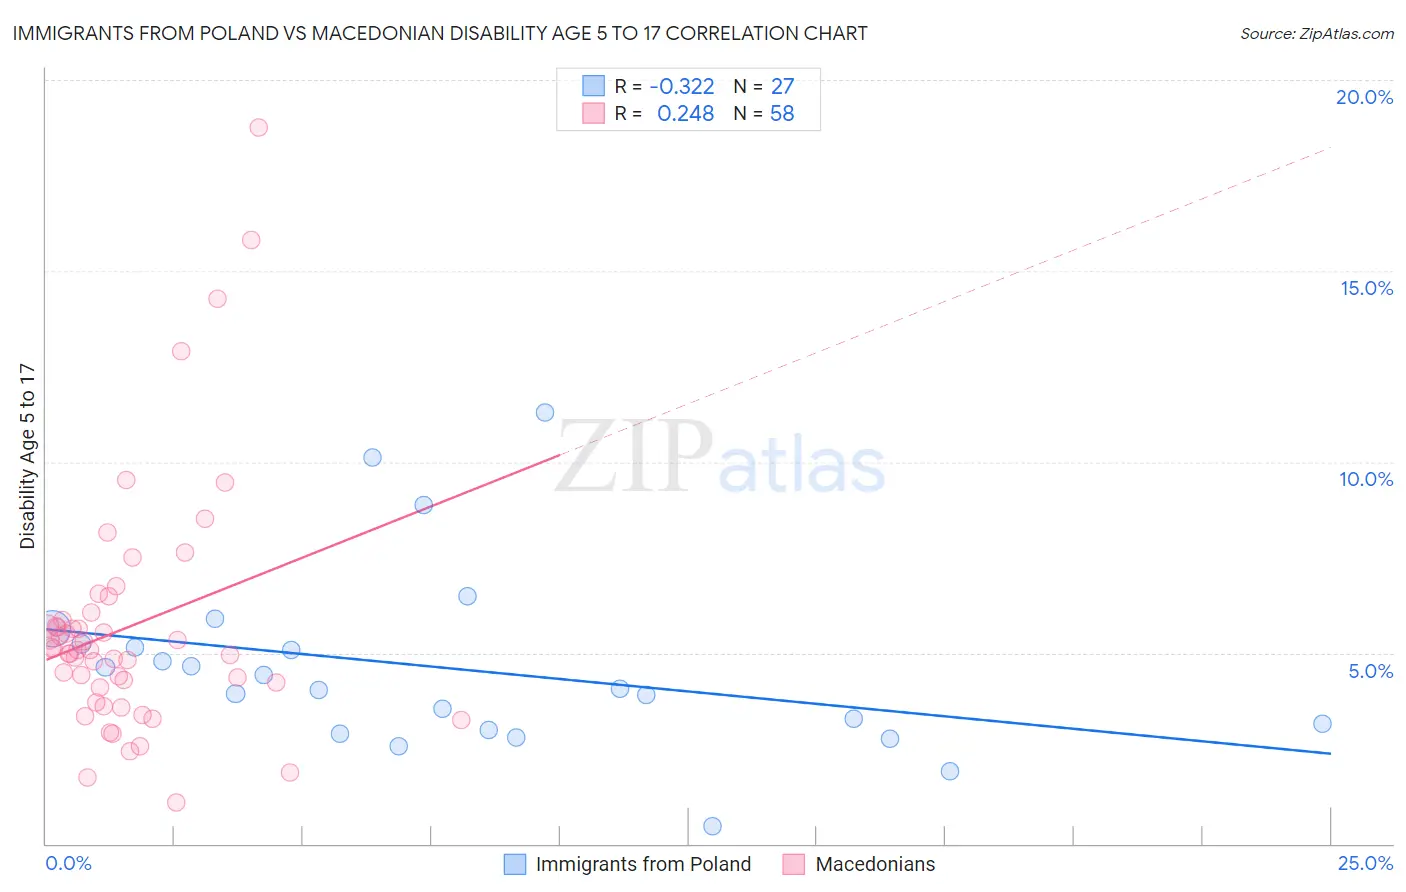 Immigrants from Poland vs Macedonian Disability Age 5 to 17